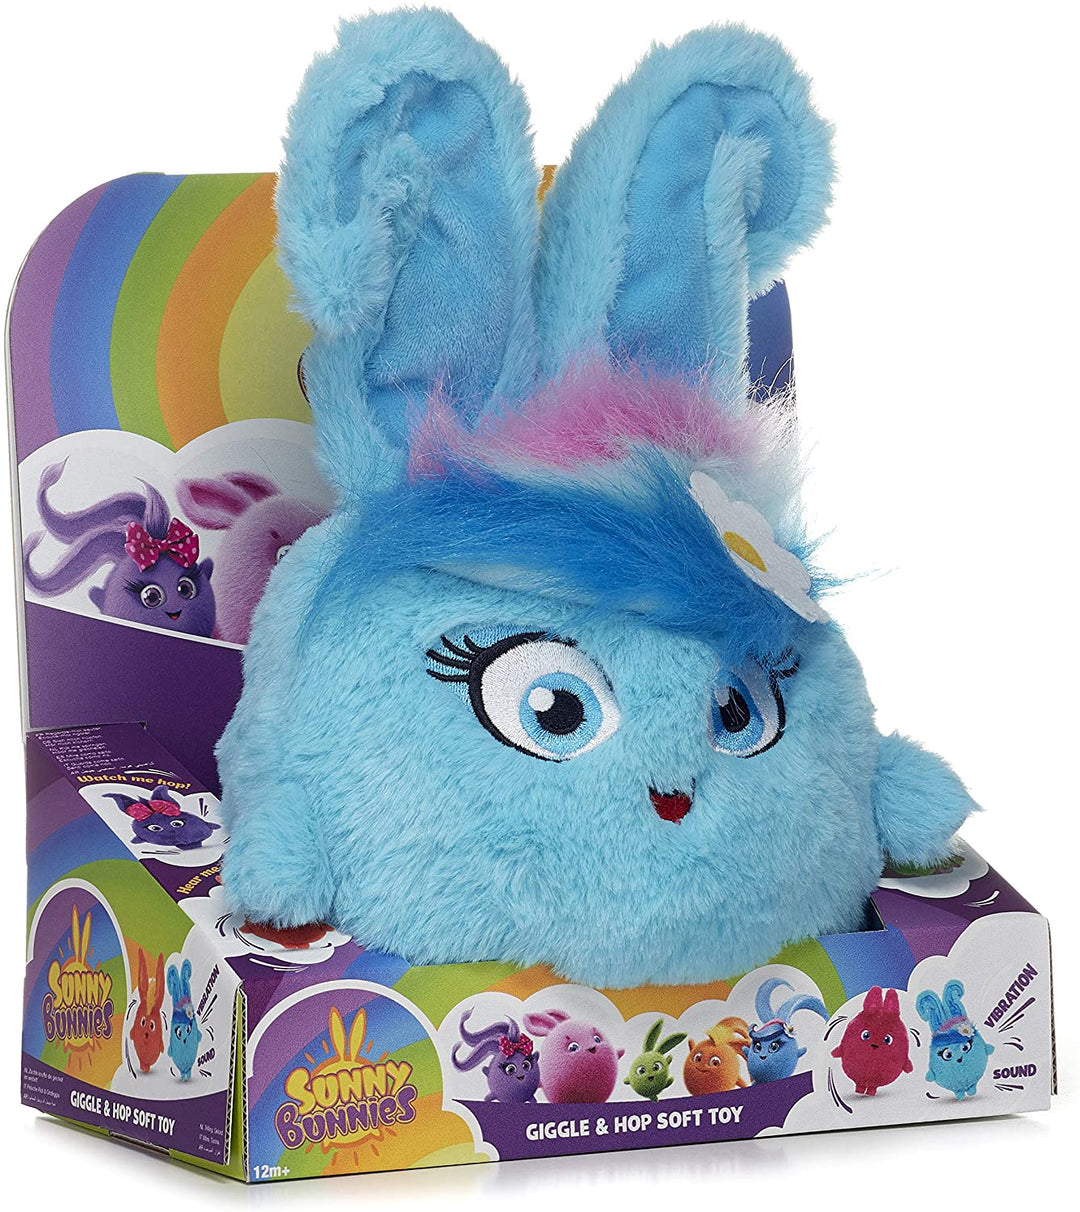 Posh Paws 37431 Sunny Bunnies Large Feature Shiny Giggle &amp; Hop Soft Toy-29 cm (10 inch)